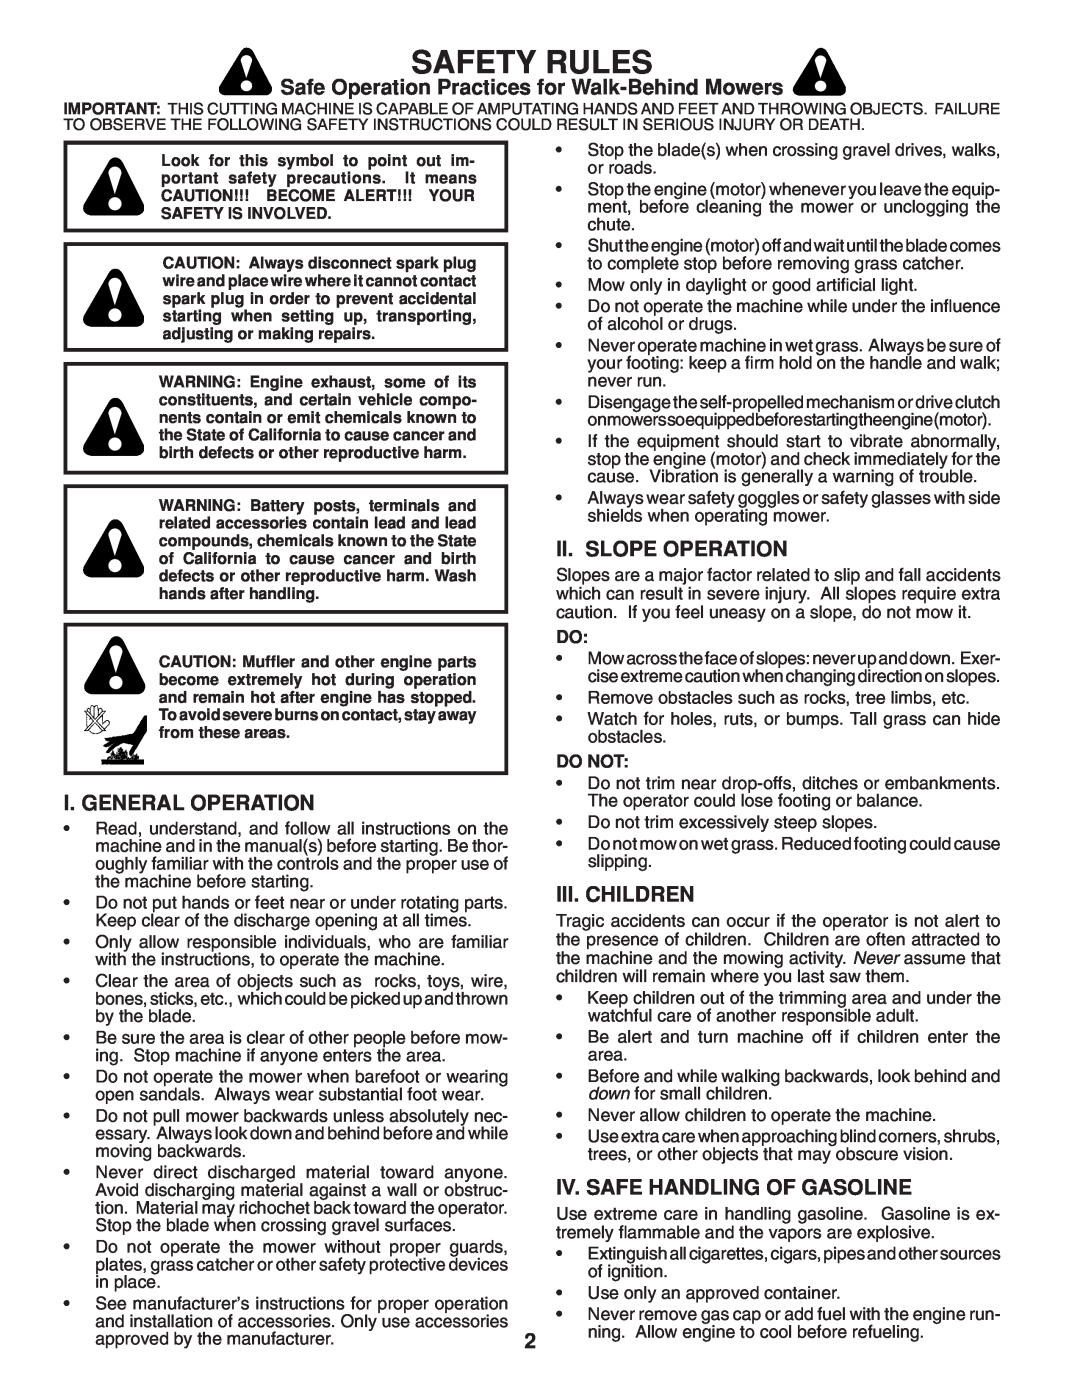 Husqvarna 961430097 Safety Rules, Safe Operation Practices for Walk-Behind Mowers, Ii. Slope Operation, Iii. Children 